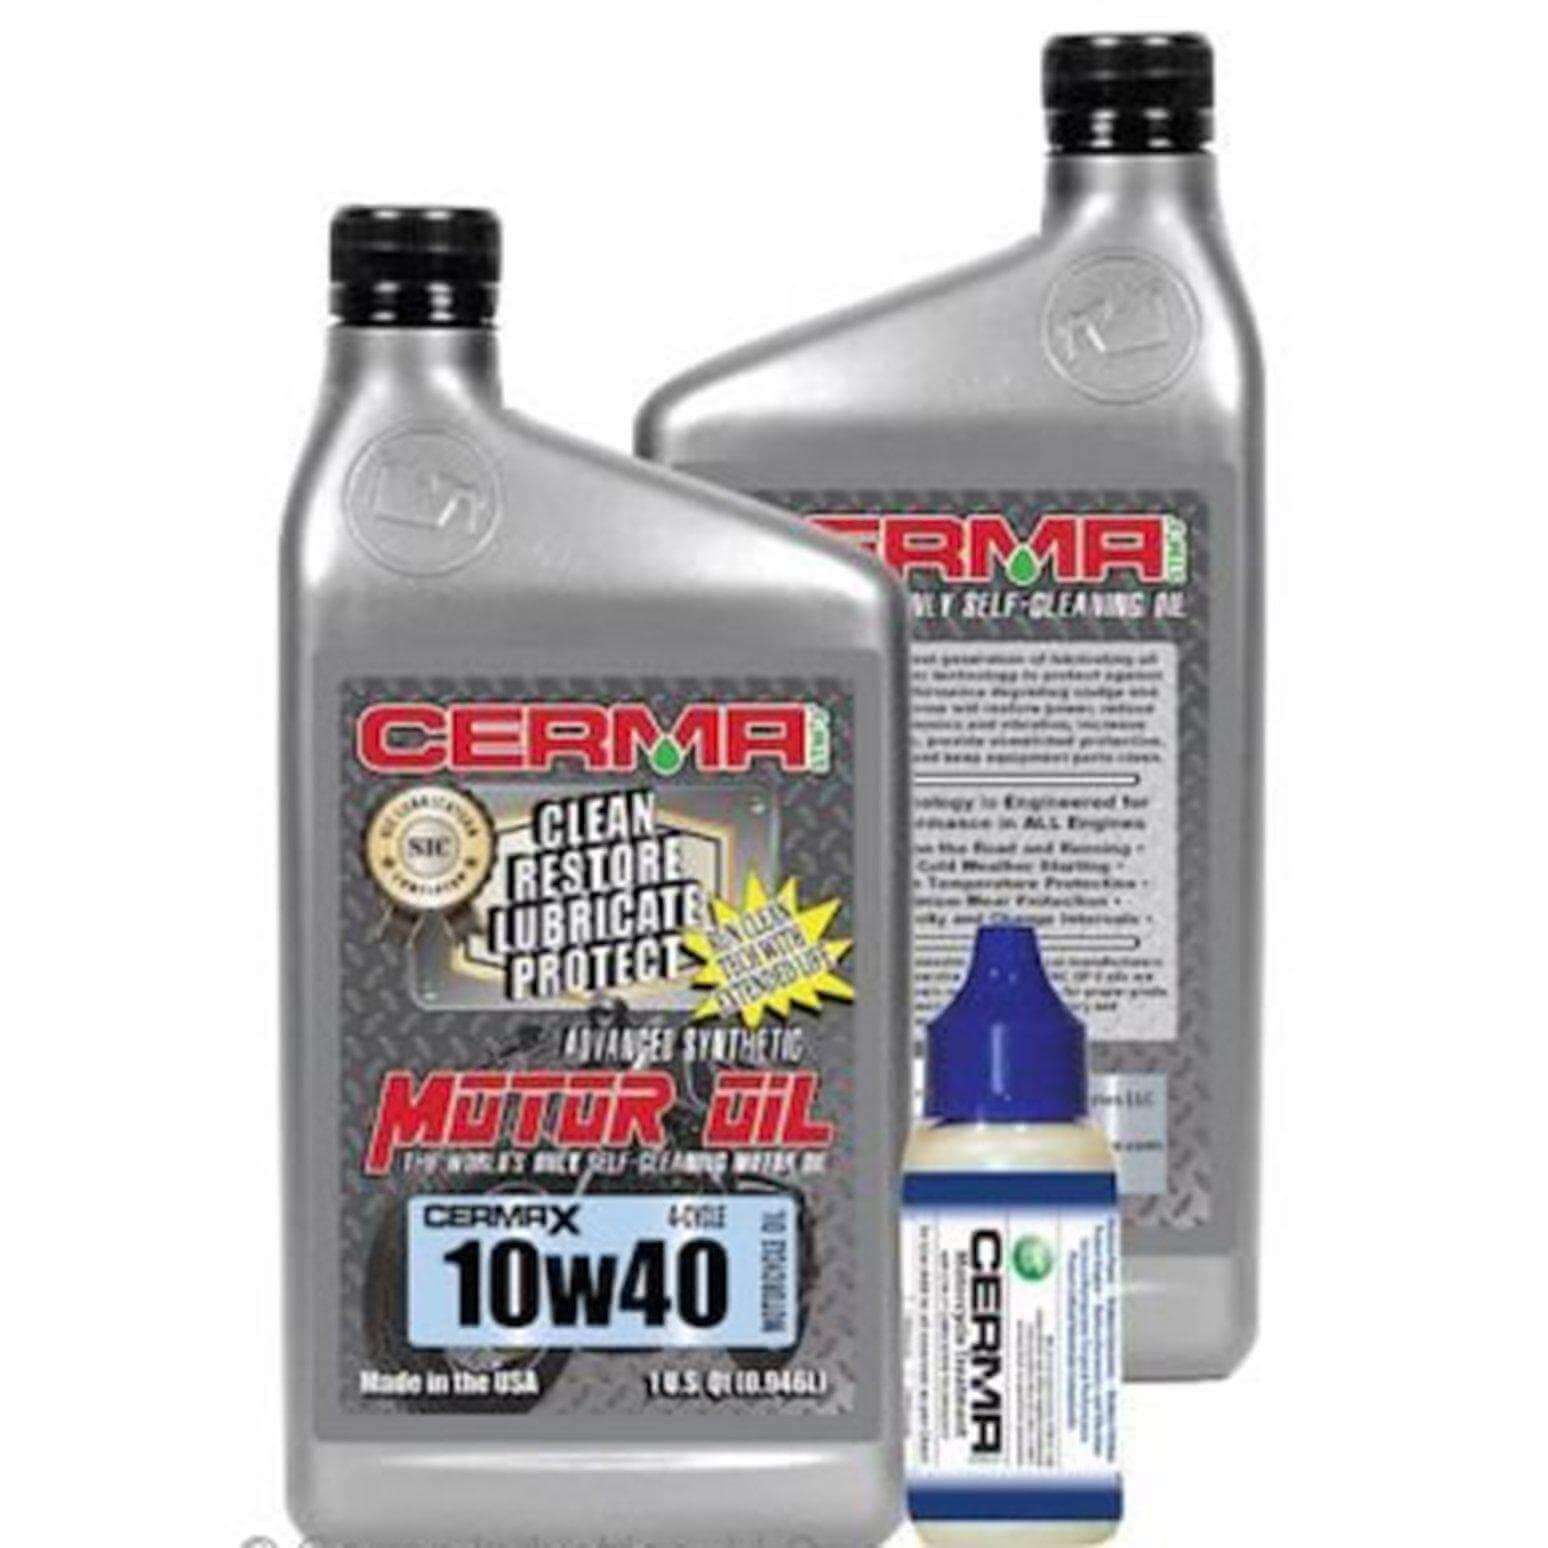 Cerma Ceramic Synthetic Oil Value Package for Motorcycles at $88 only from cermatreatment.com